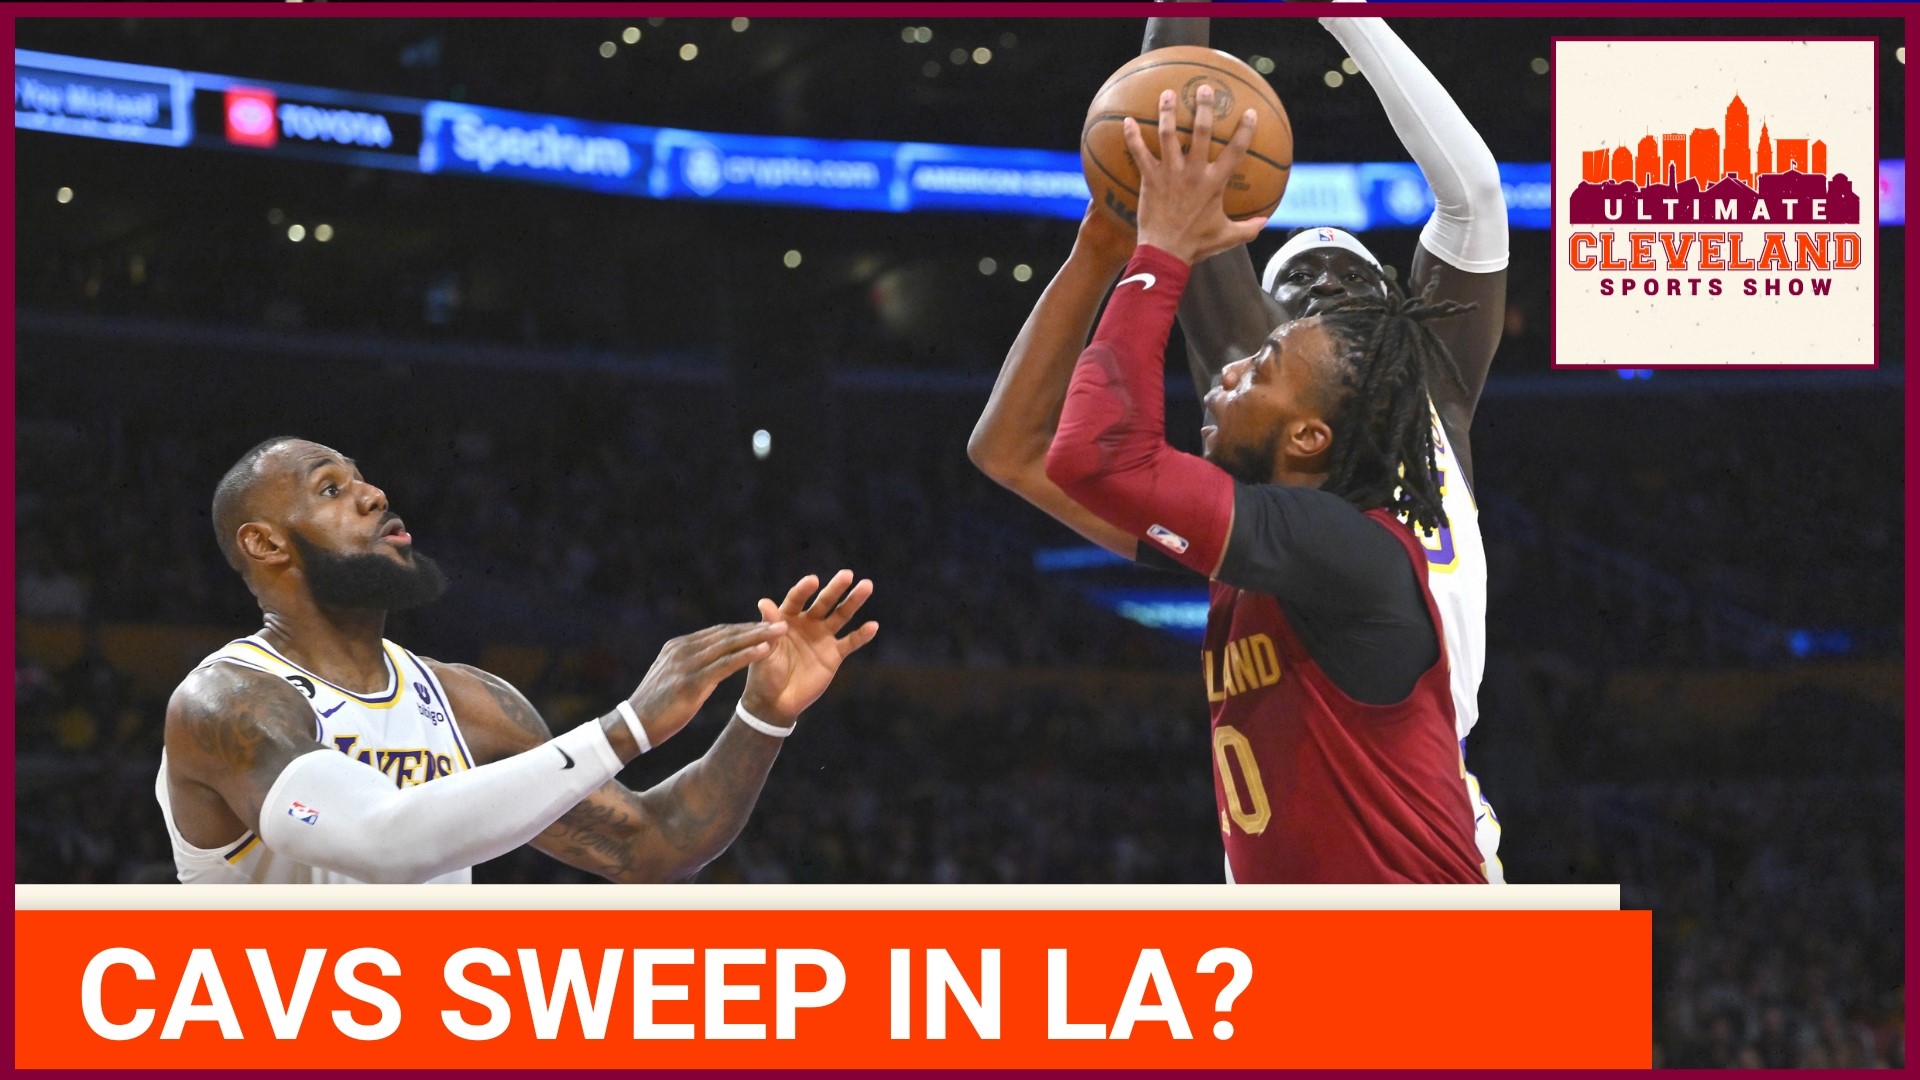 The Cleveland Cavaliers are on a 8-game win streak. Can they sweep in LA to make it nine in a row?